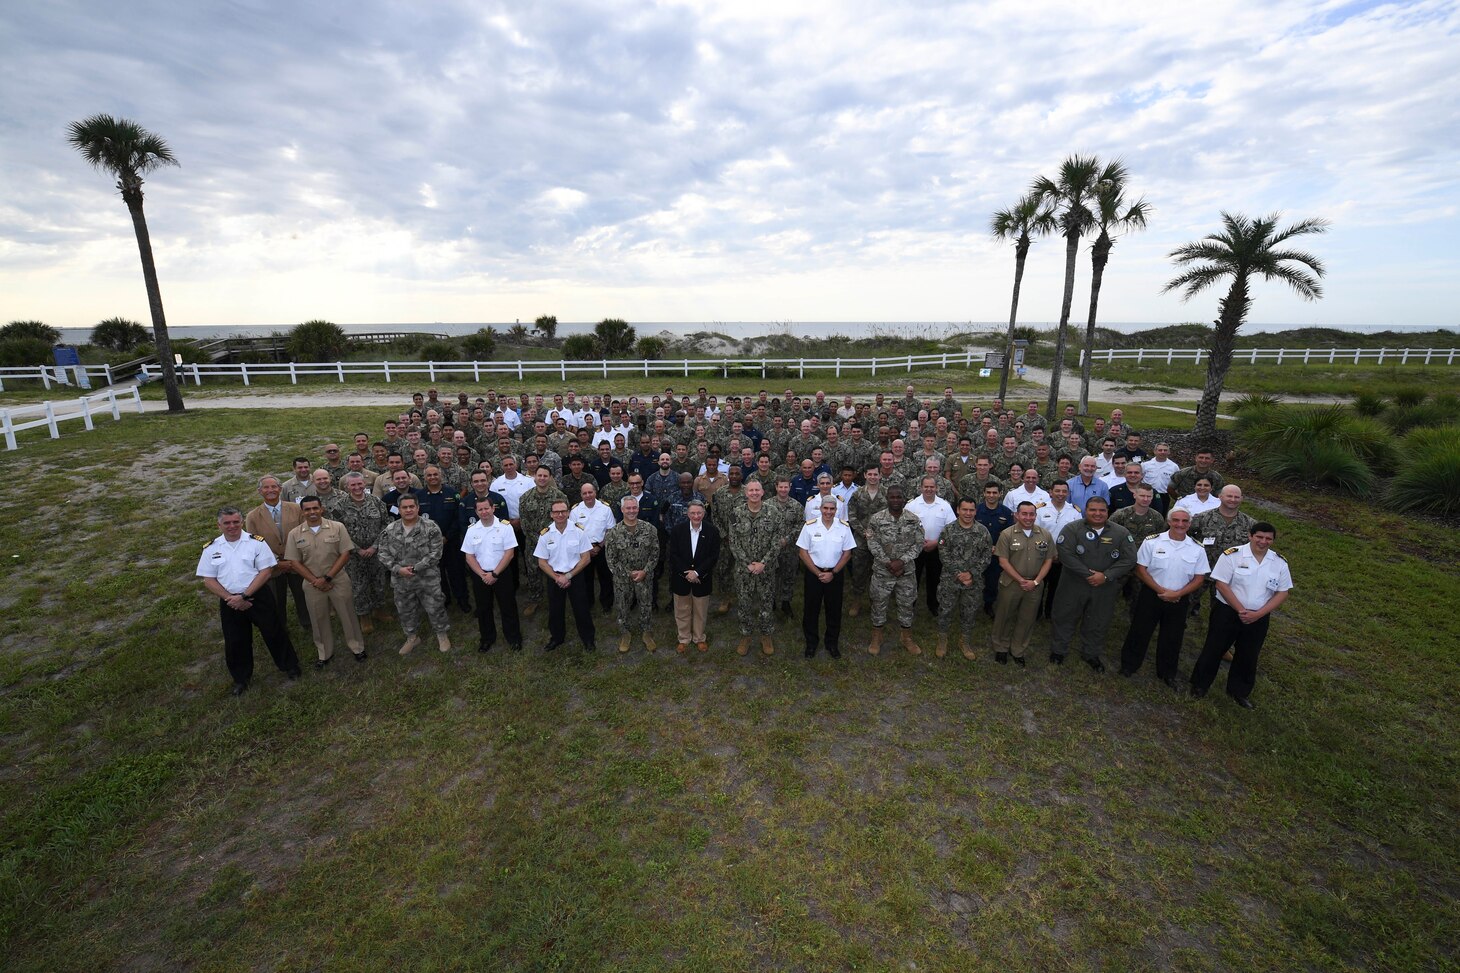 U.S. and partner nation participants from the Combined Force Maritime Component Command pose for a group photo at the start of PANAMAX 2022, at Naval Station Mayport, Fla., Aug. 2, 2022. Exercise PANAMAX 2022 is a U.S. Southern Command-sponsored exercise that provides important training opportunities for nations to work together and build upon the capability to plan and conduct complex multinational operations. The exercise scenario involves security and stability operations to ensure free flow of commerce through the Panama Canal.